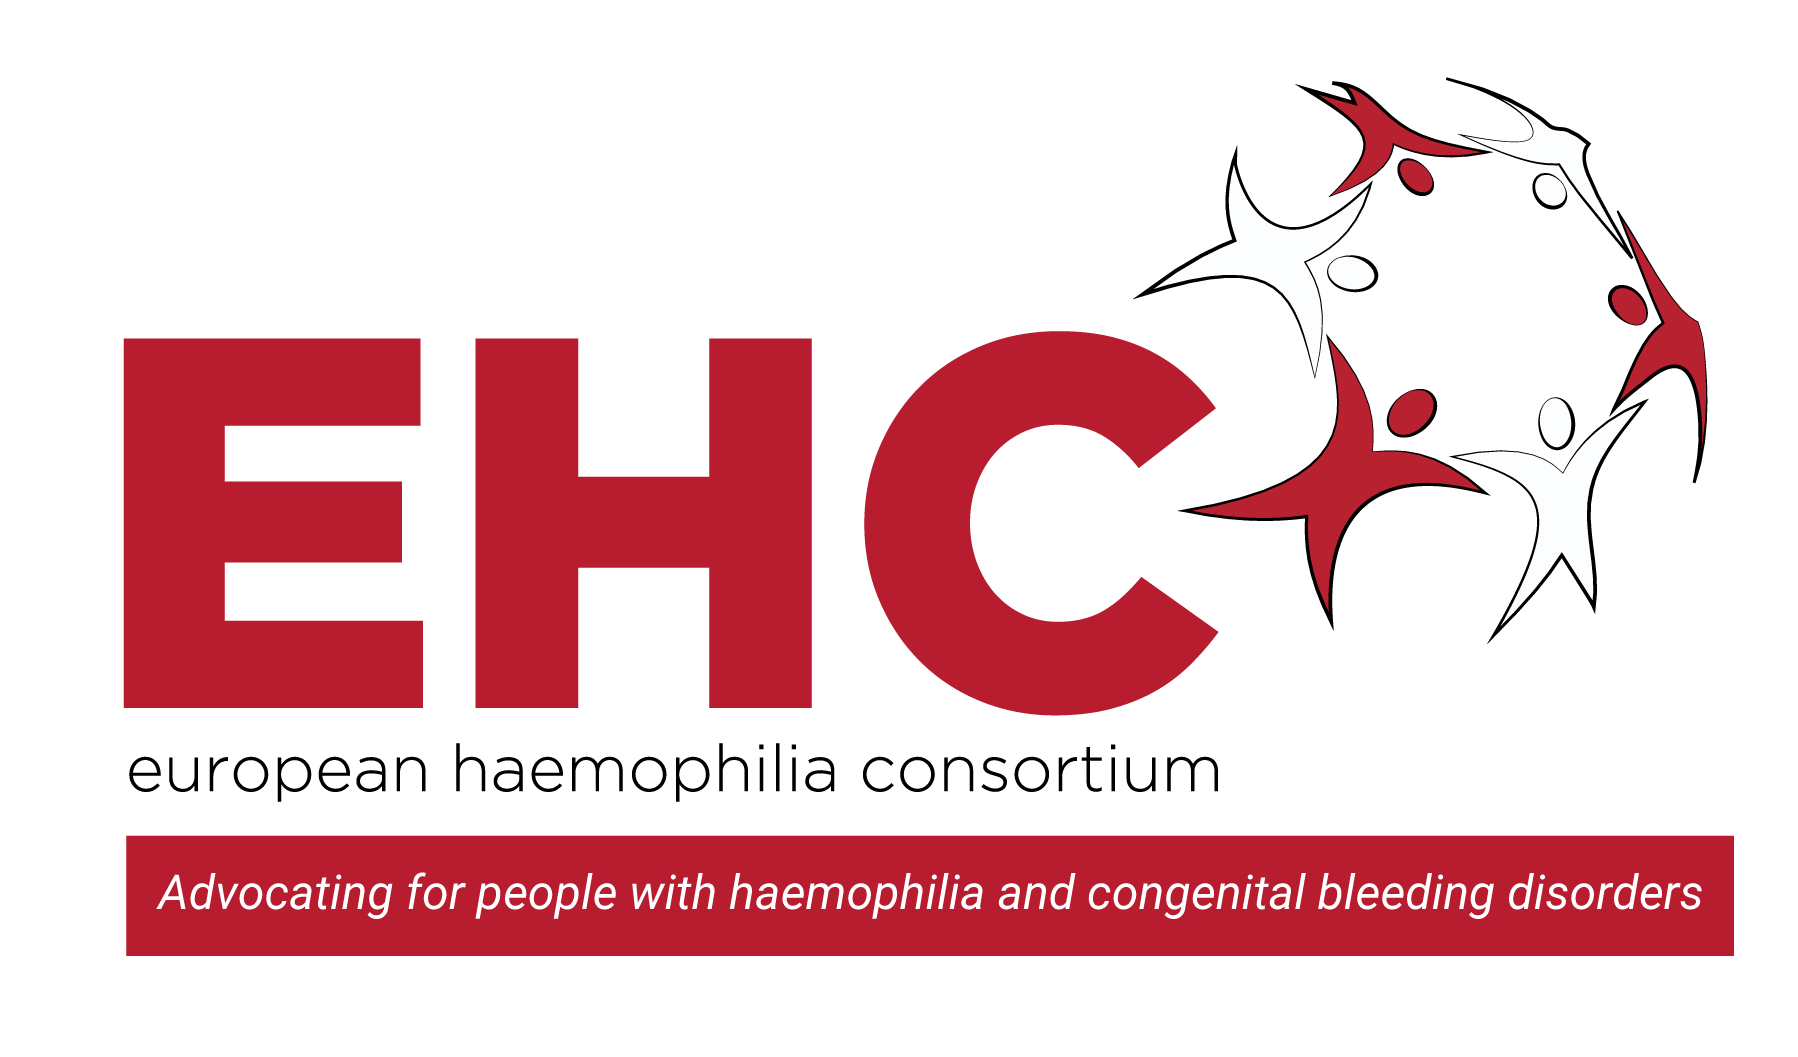 EHC – European Haemophilia Consortium - Advocating for people with haemophilia and congenital bleeding disorders - /ehc-publishes-september-newsletter/